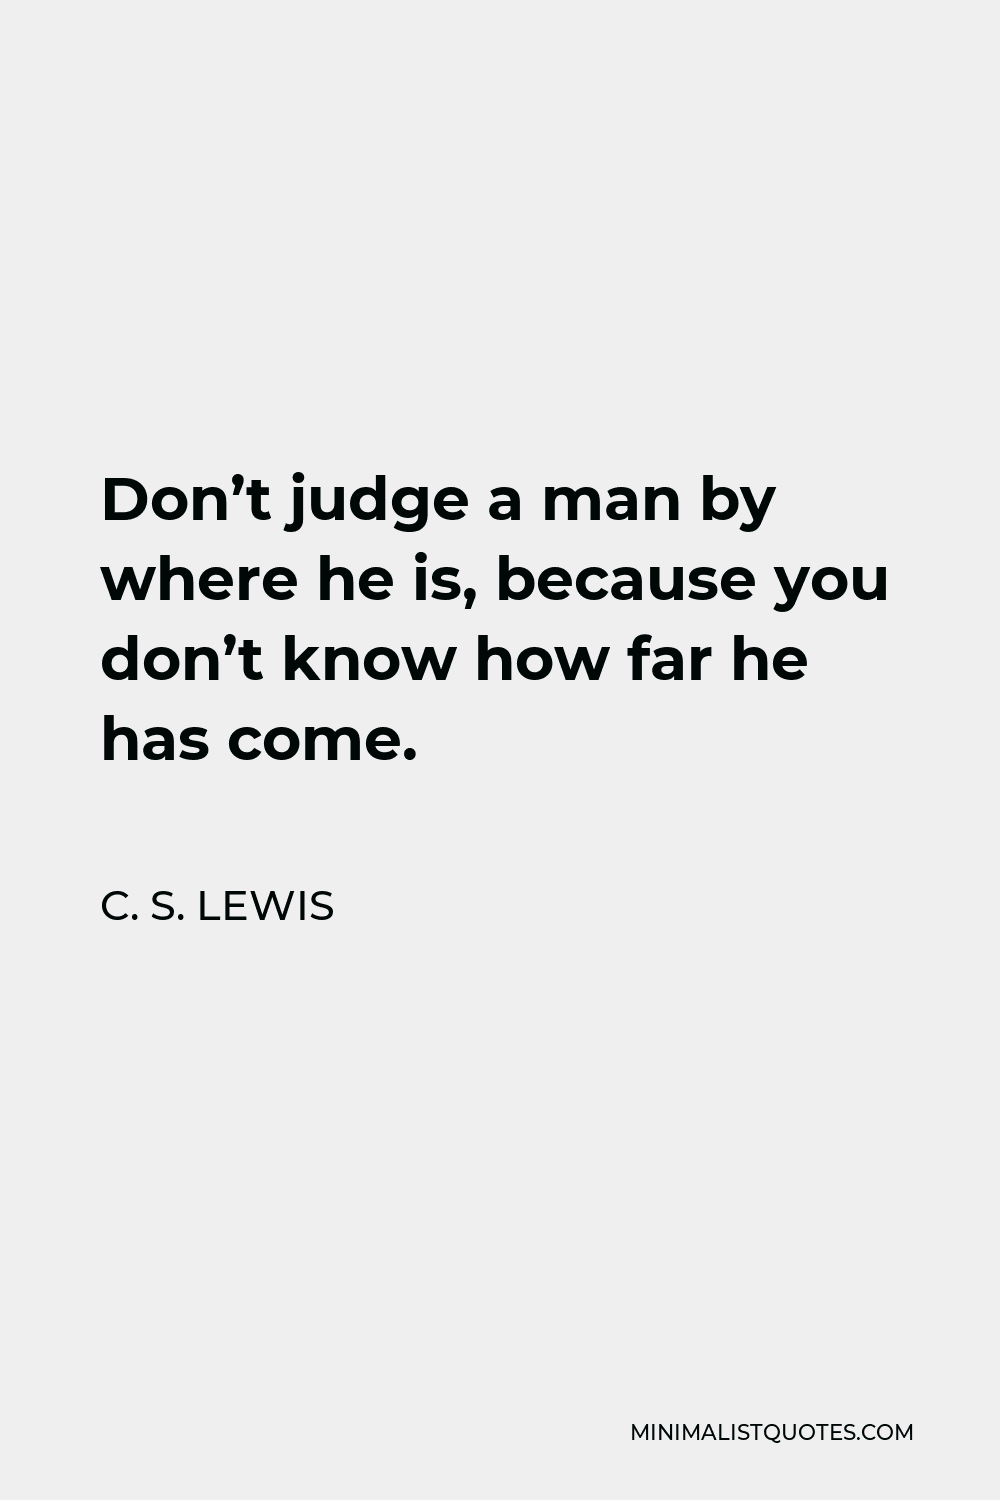 C. S. Lewis Quote - Don’t judge a man by where he is, because you don’t know how far he has come.